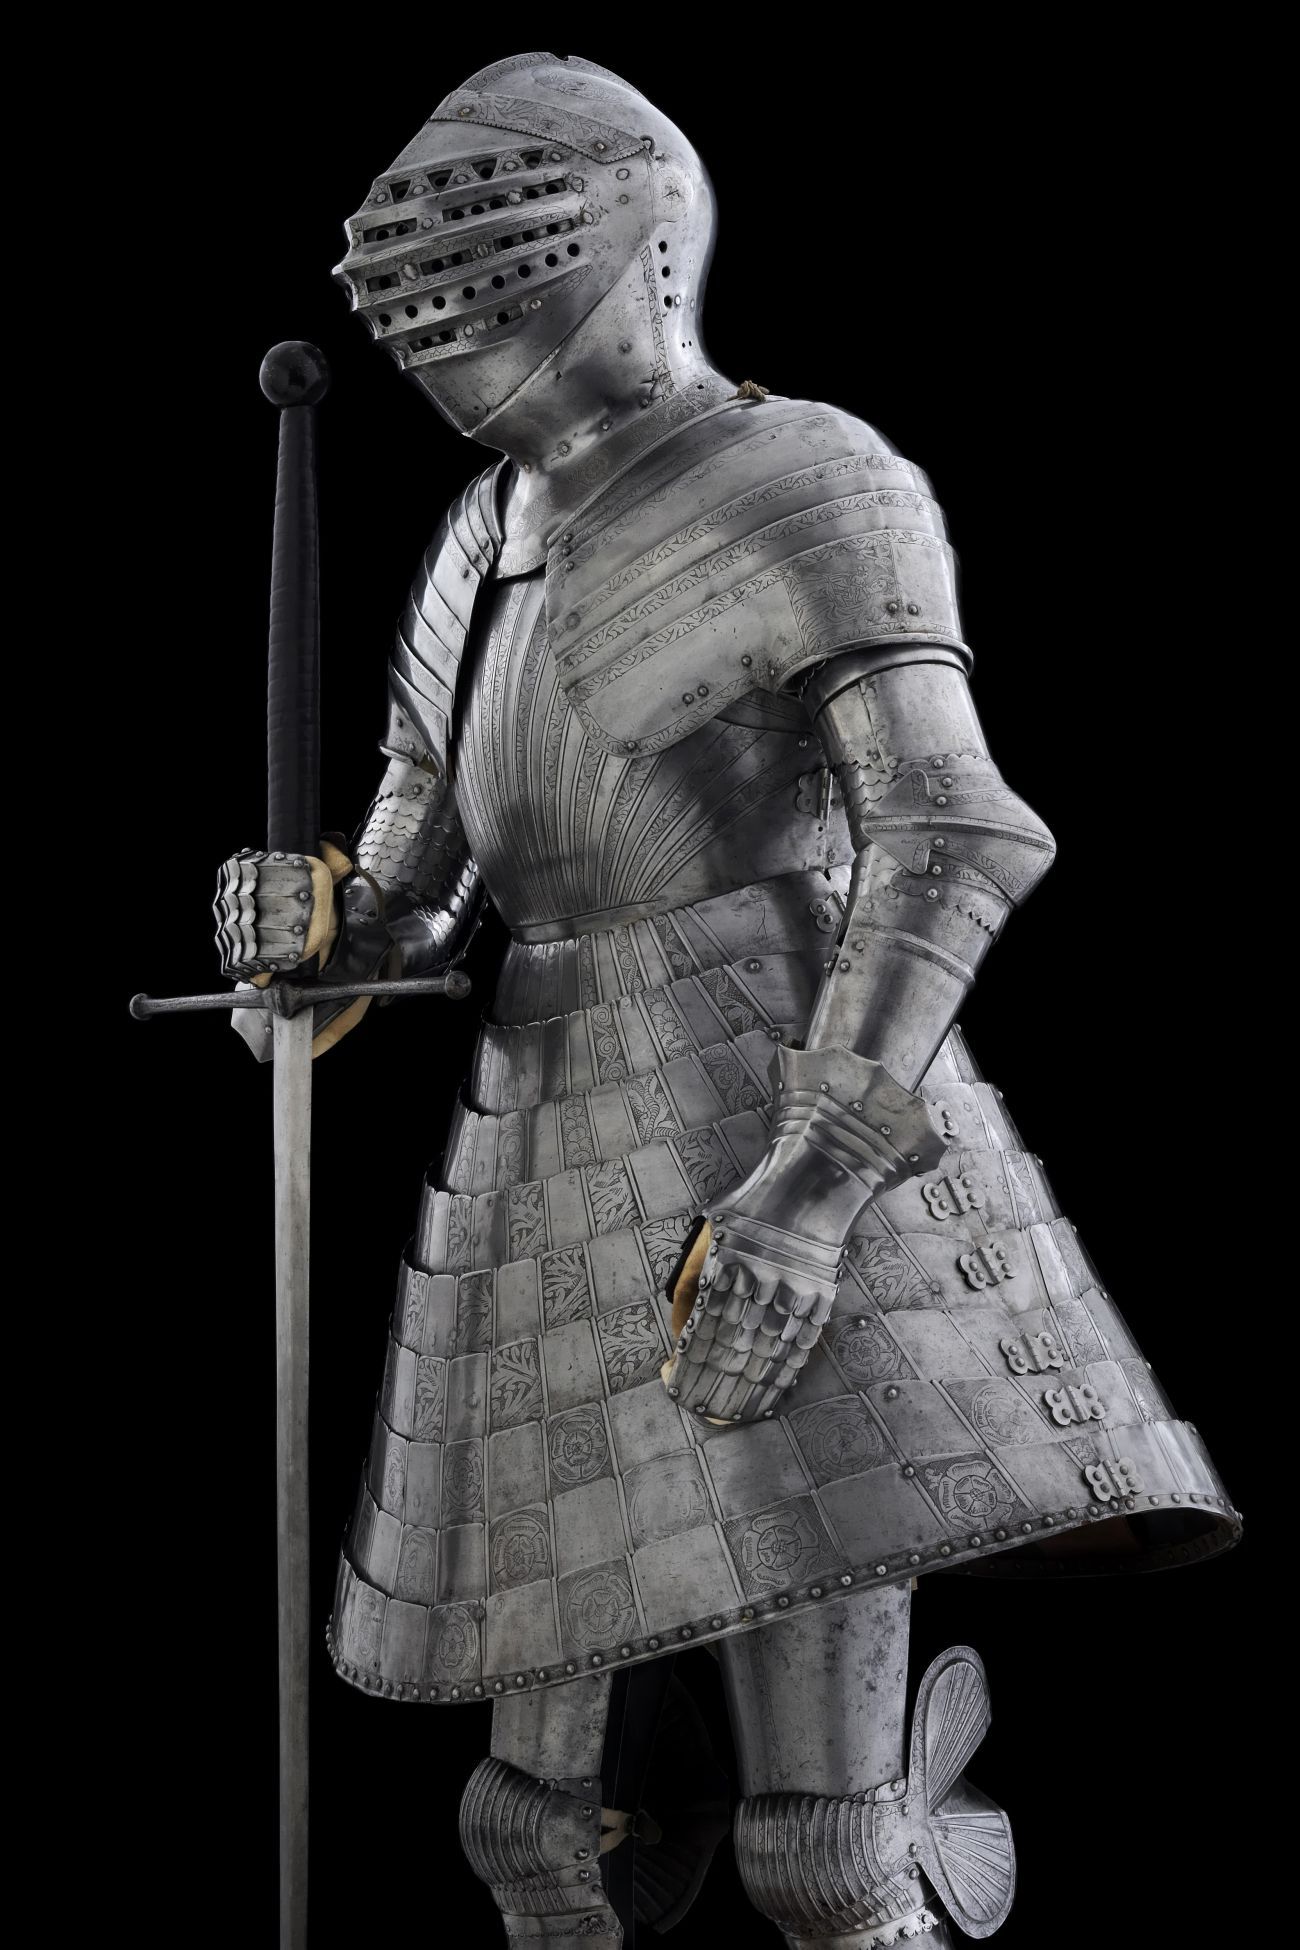 Full suit of armour with helmet and hooped metal skirt. Stood upright with gauntleted hand grasping the hilt of a huge sword pointing to the floor. 